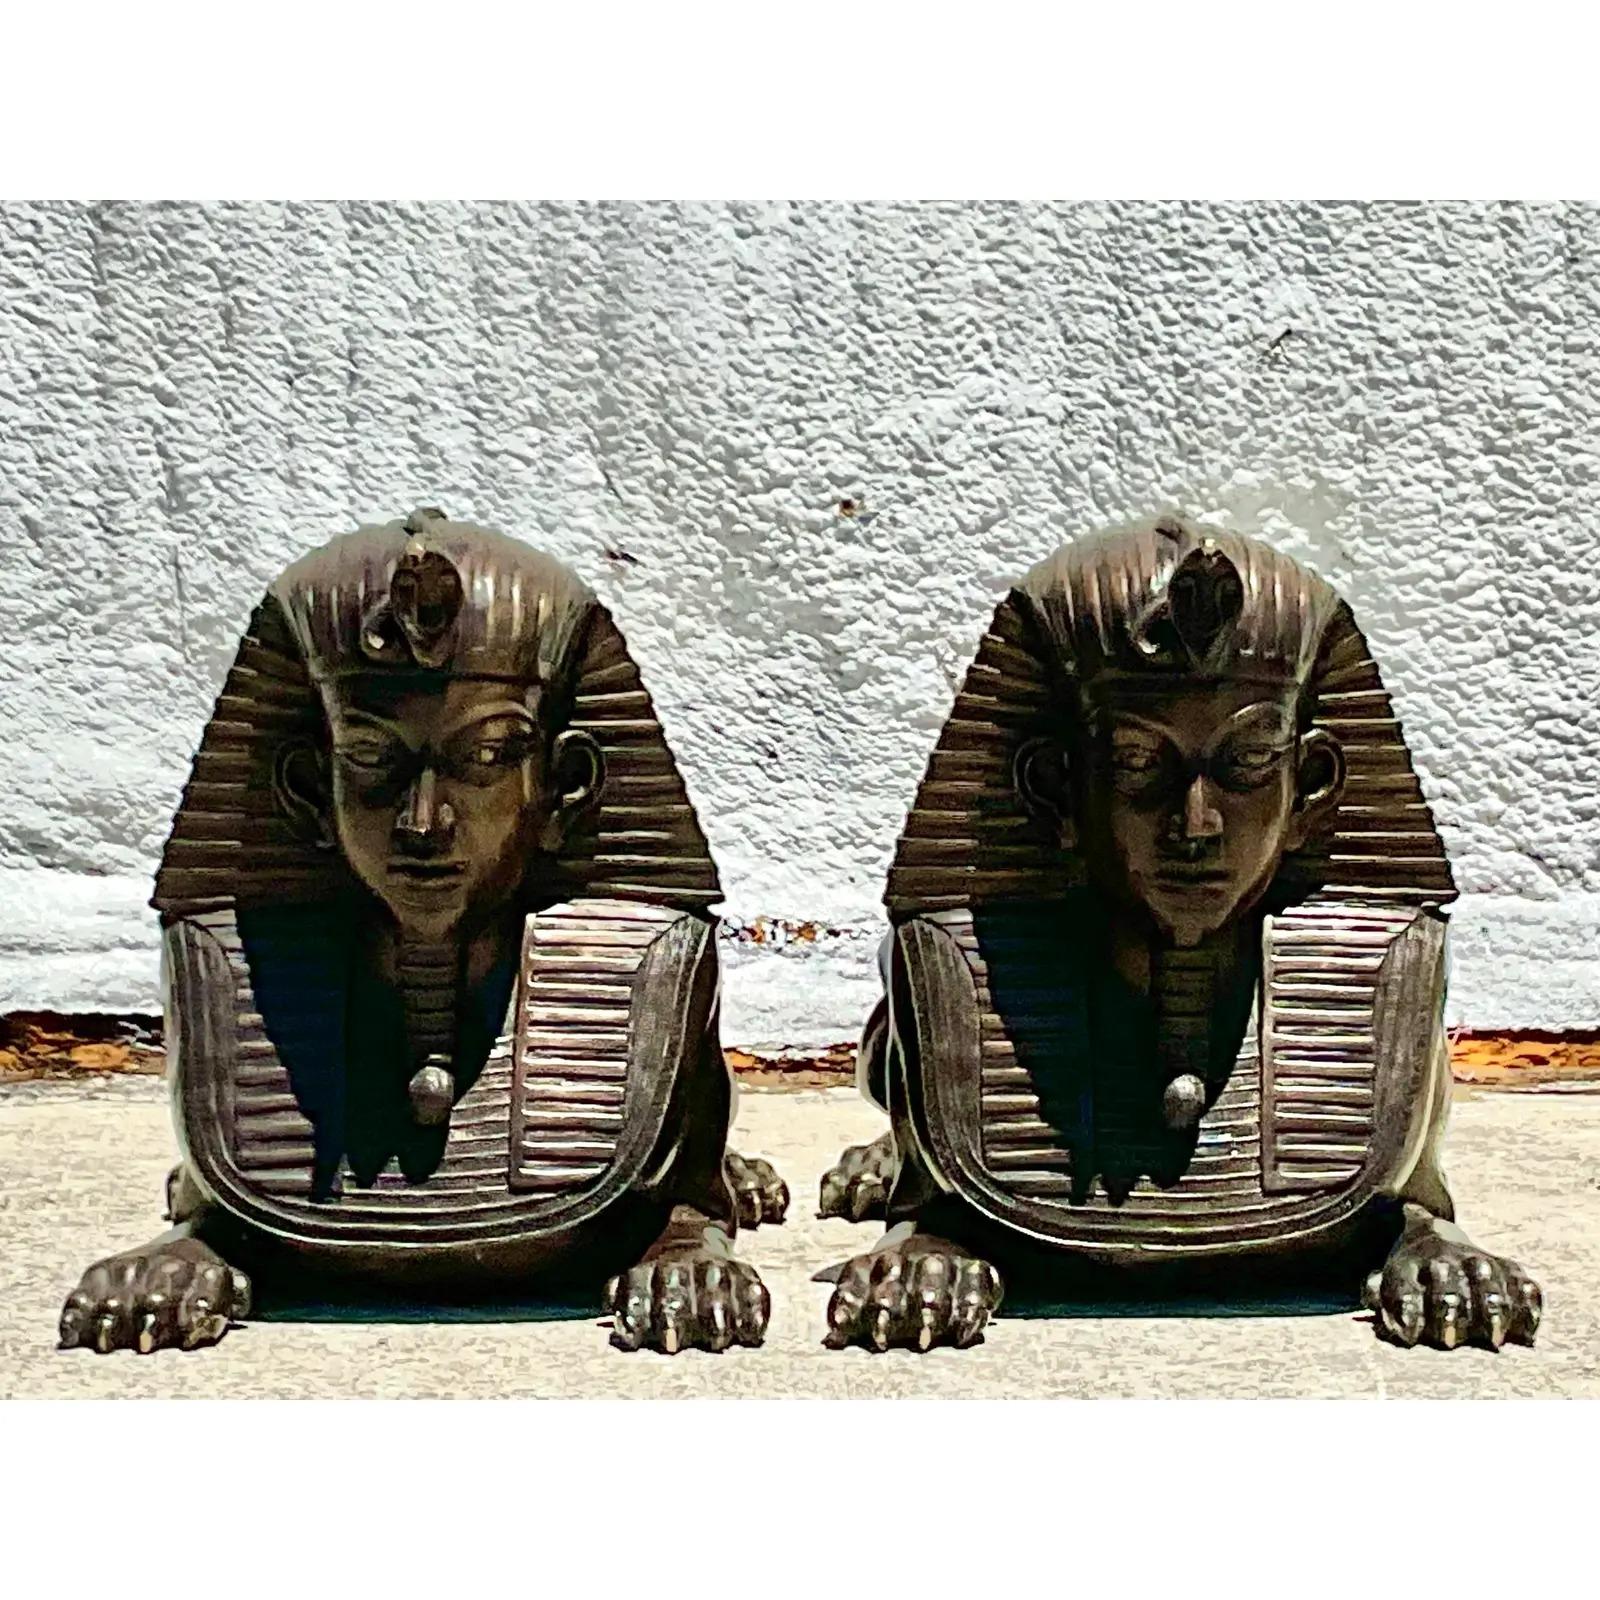 20th Century Vintage Monumental Bronze Sphinxes - a Pair For Sale